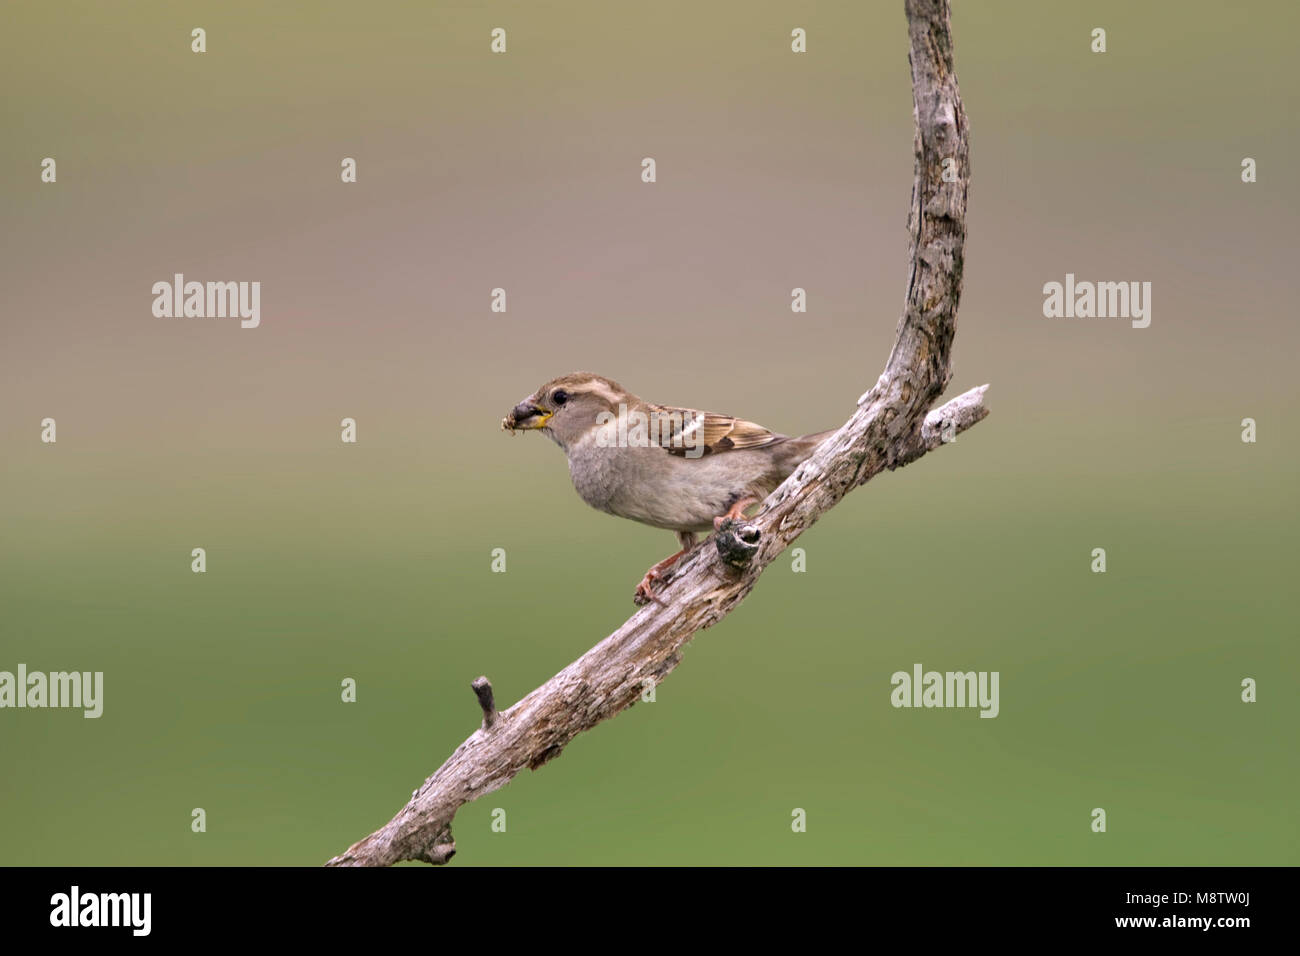 Huismus vrouwtje zittend op tak Nederland, House Sparrow female perched at branch Netherlands Stock Photo